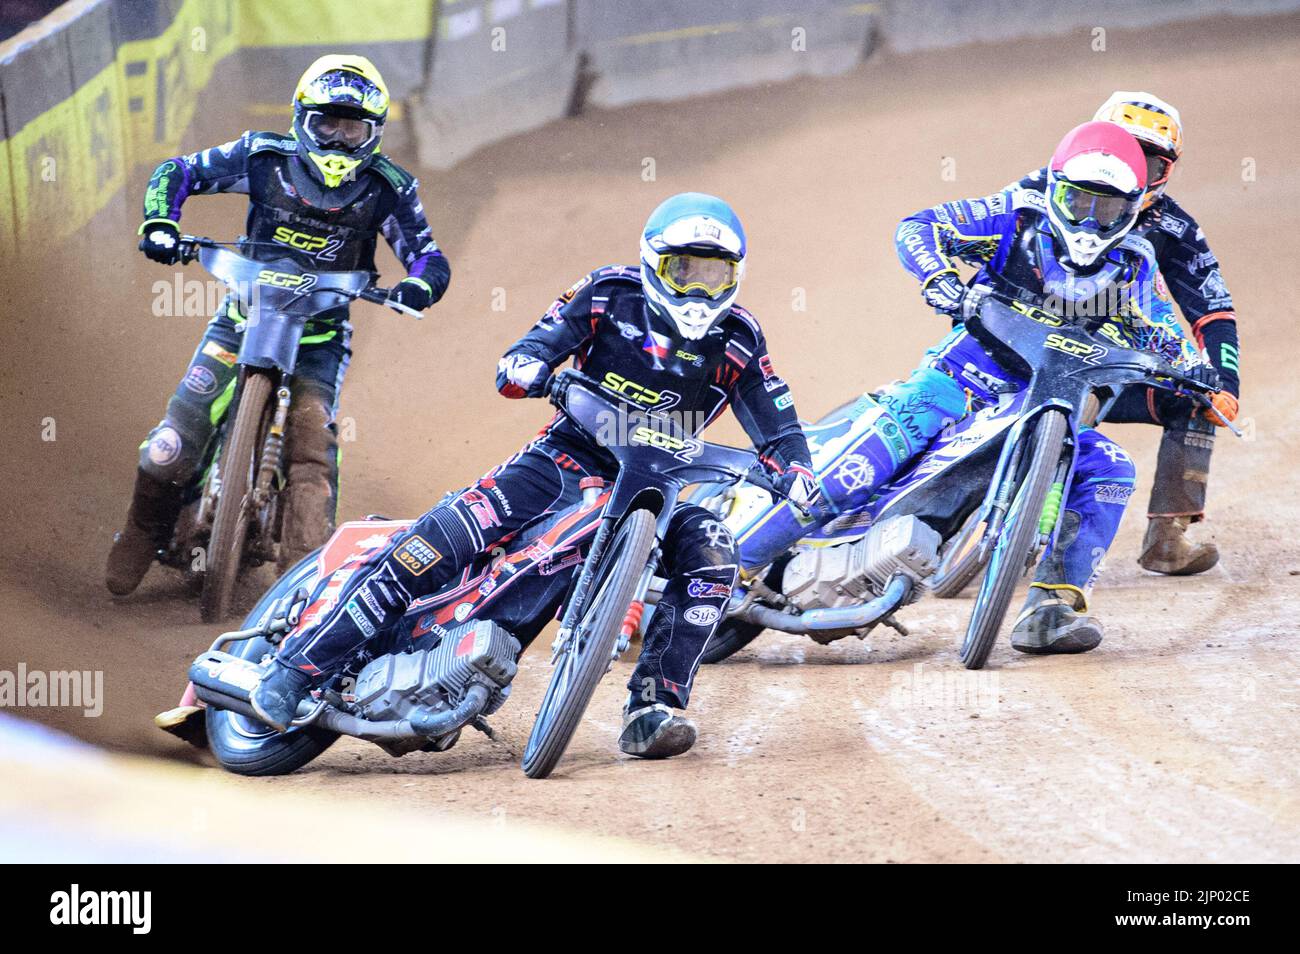 Jan Kvech (Czech Republic) (Blue) leads Petr Chlupac (Czech Republic) (Red), Tom Brennan (Great Britain) (Yellow) and Kevin Juhl Pedersen (Denmark) (White) during the FIM Speedway Grand Prix 2 of Great Britain at the Principality Stadium, Cardiff on Sunday 14th August 2022. (Credit: Ian Charles | MI News) Credit: MI News & Sport /Alamy Live News Stock Photo